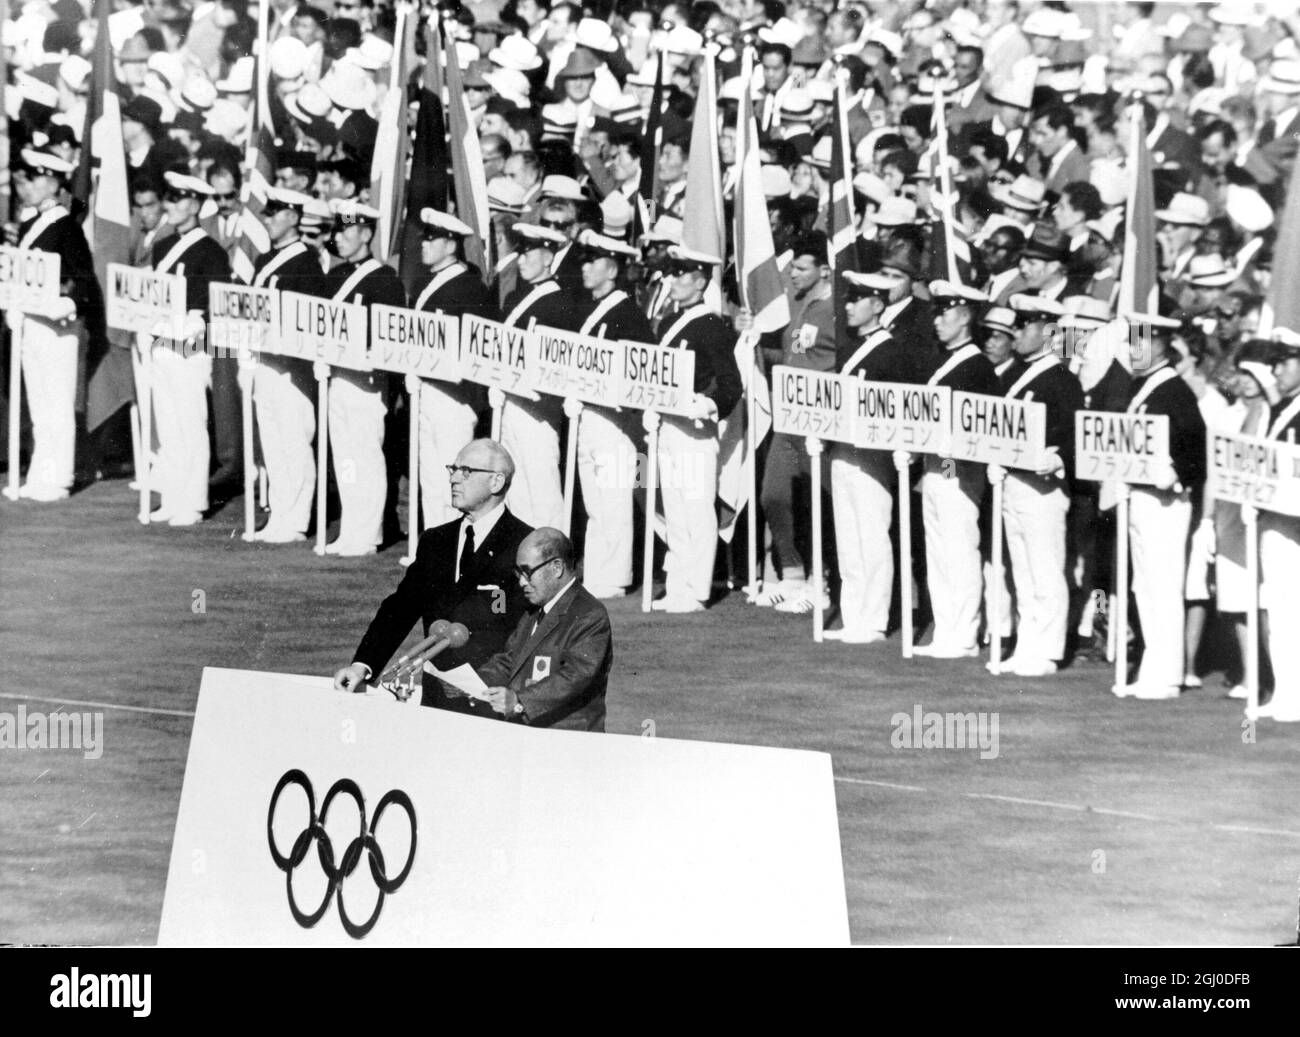 The President of the Olympic Organising Committee, Daigoro Yasukawa and the President of the International Olympic Committee Avery Brundaga on the rostrum in front of the Royal Box in the Great Olympic Stadium in Tokyo during the opening ceremony of the 1964 Olympic Games. 11th October 1964 Stock Photo